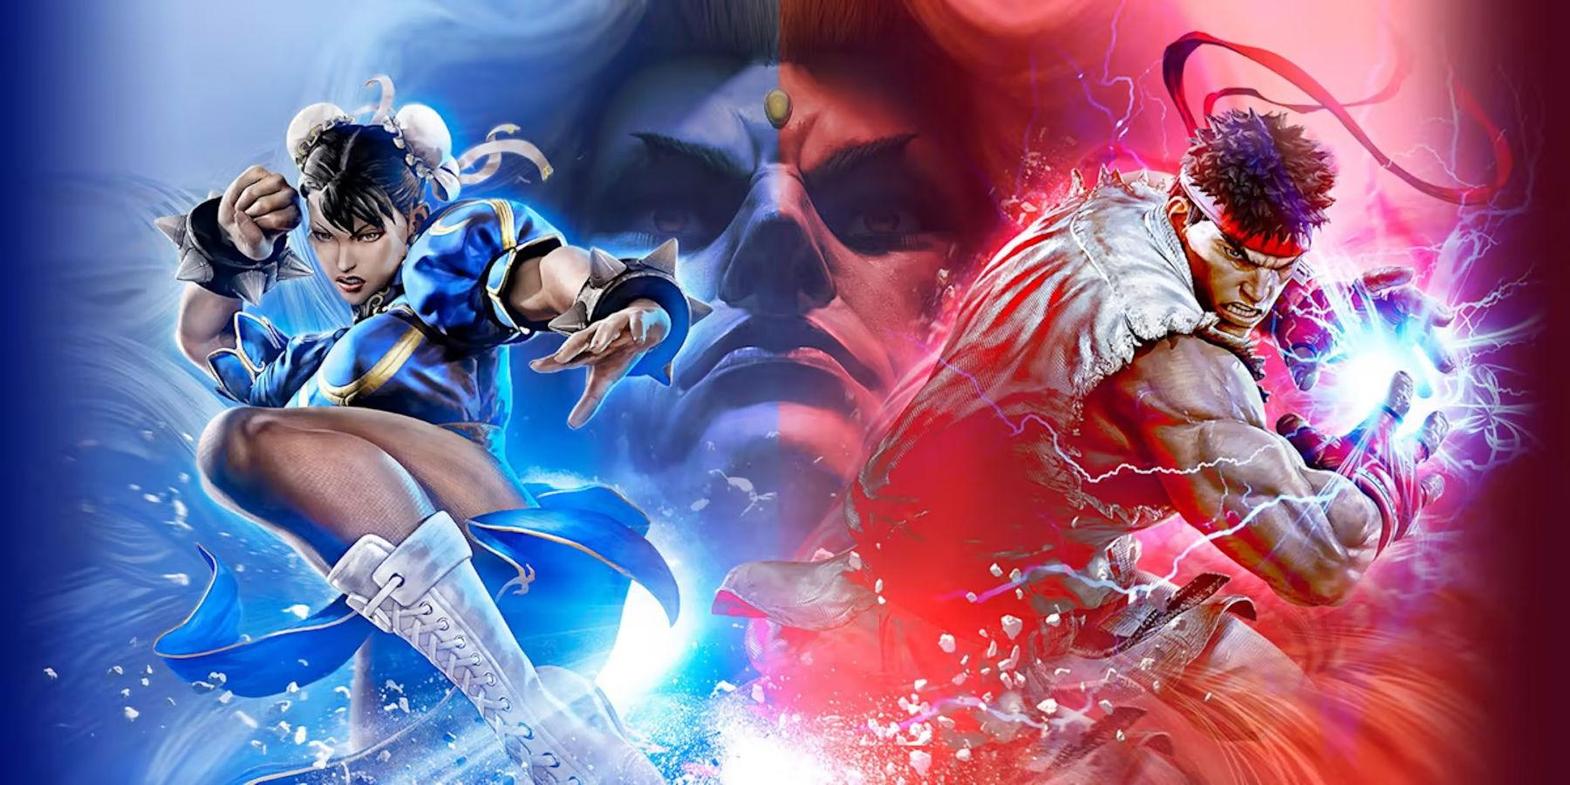 Could the new Street Fighter be released soon?